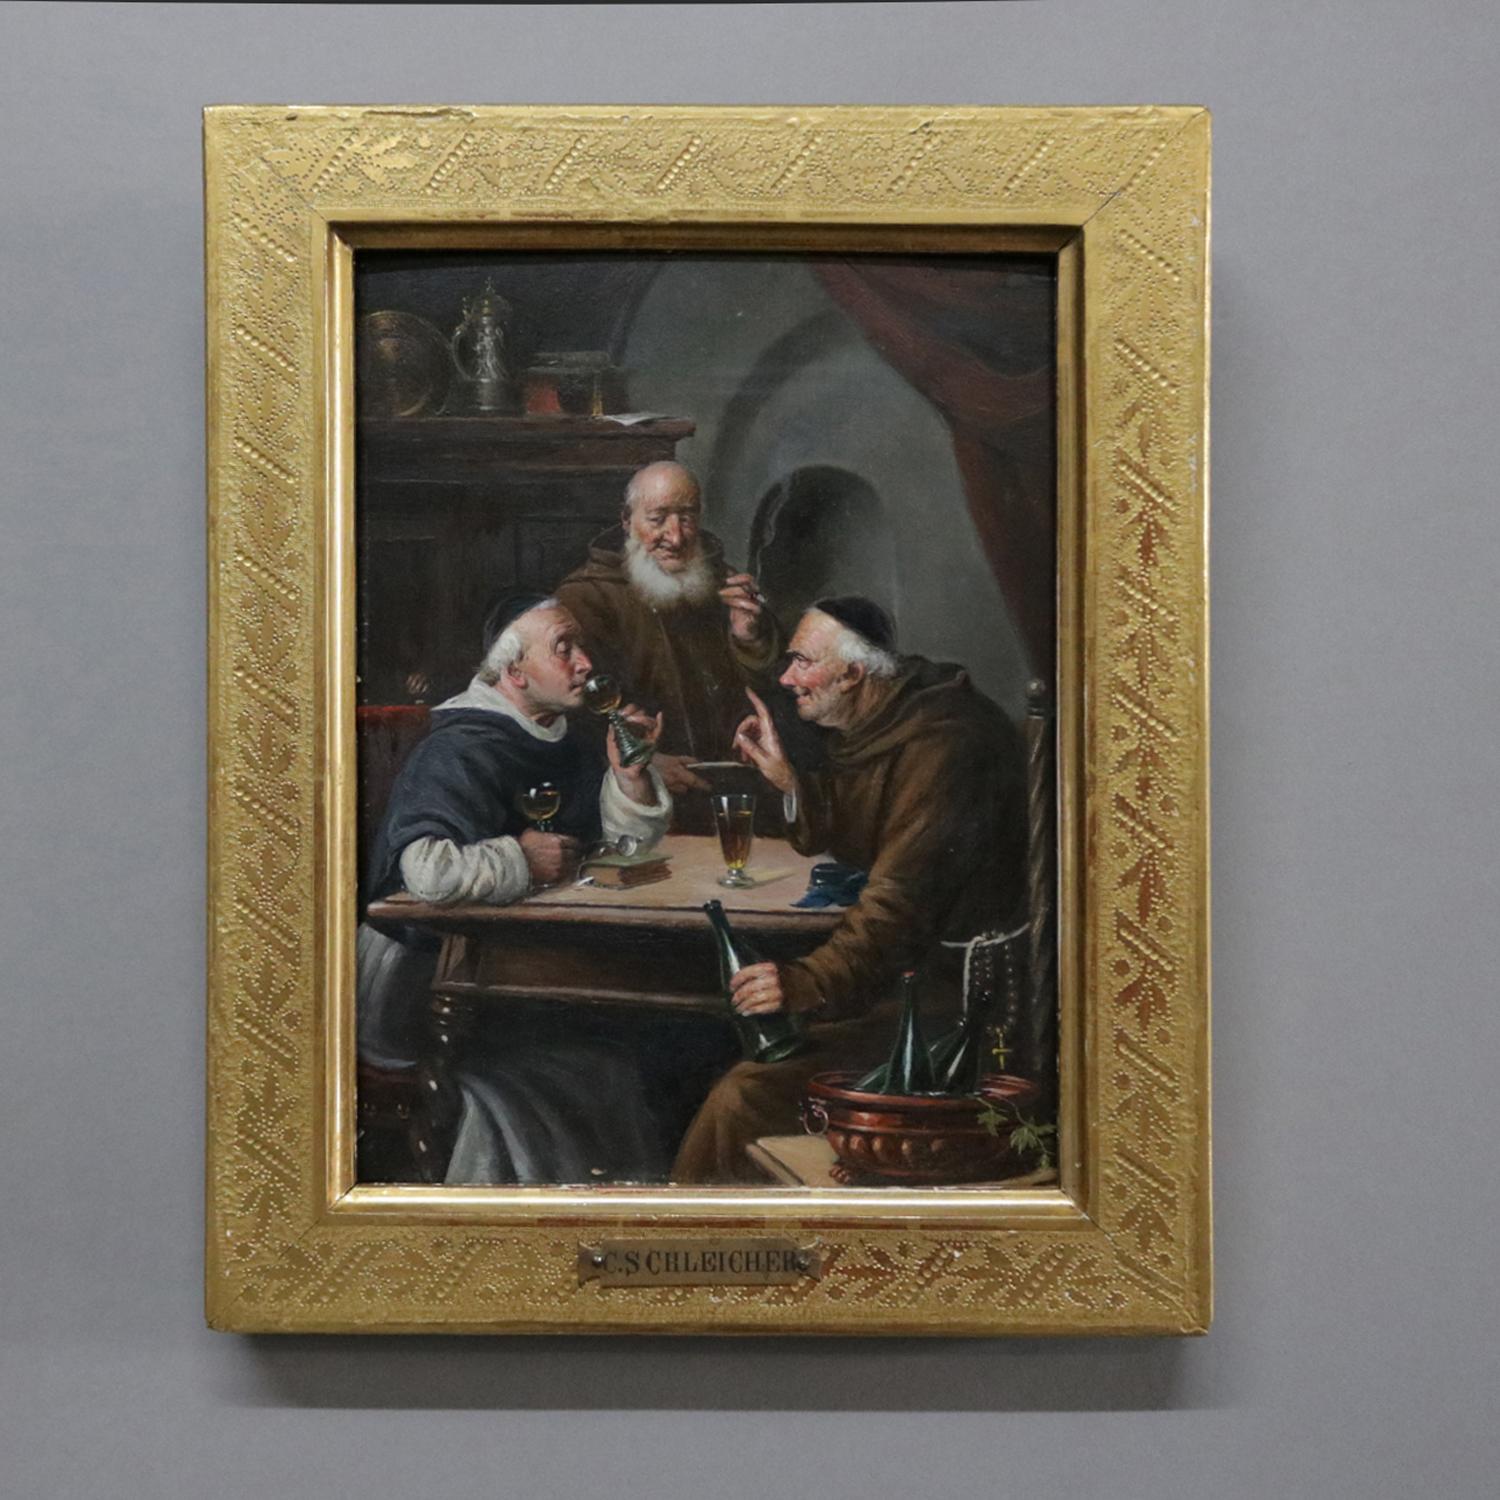 Antique oil on board genre painting depicts celebrating monks sipping wine and smoking, signed upper right, seated in gilt frame, en verso original label and stamp, 19th century.

Measures: 10.5